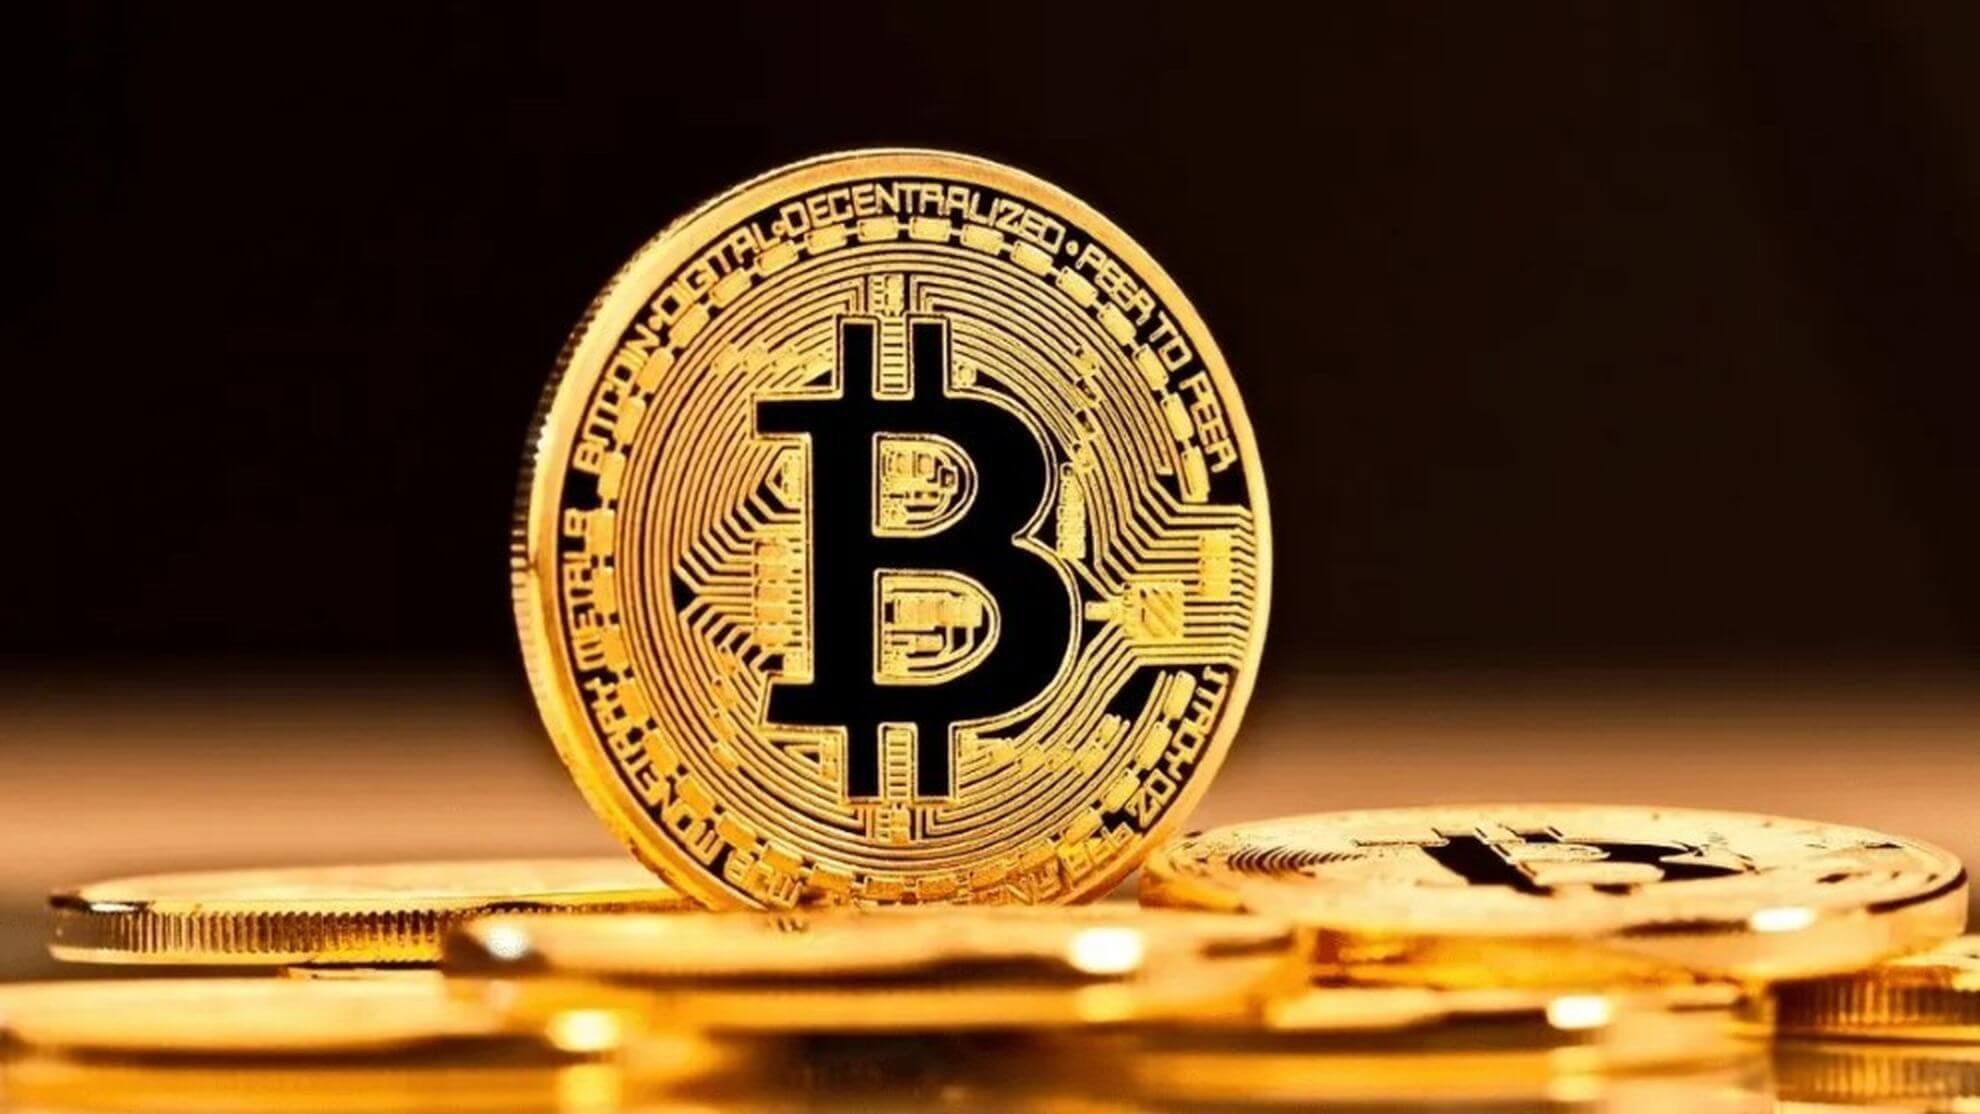 golden bitcoin surround by other bitcoins lying down